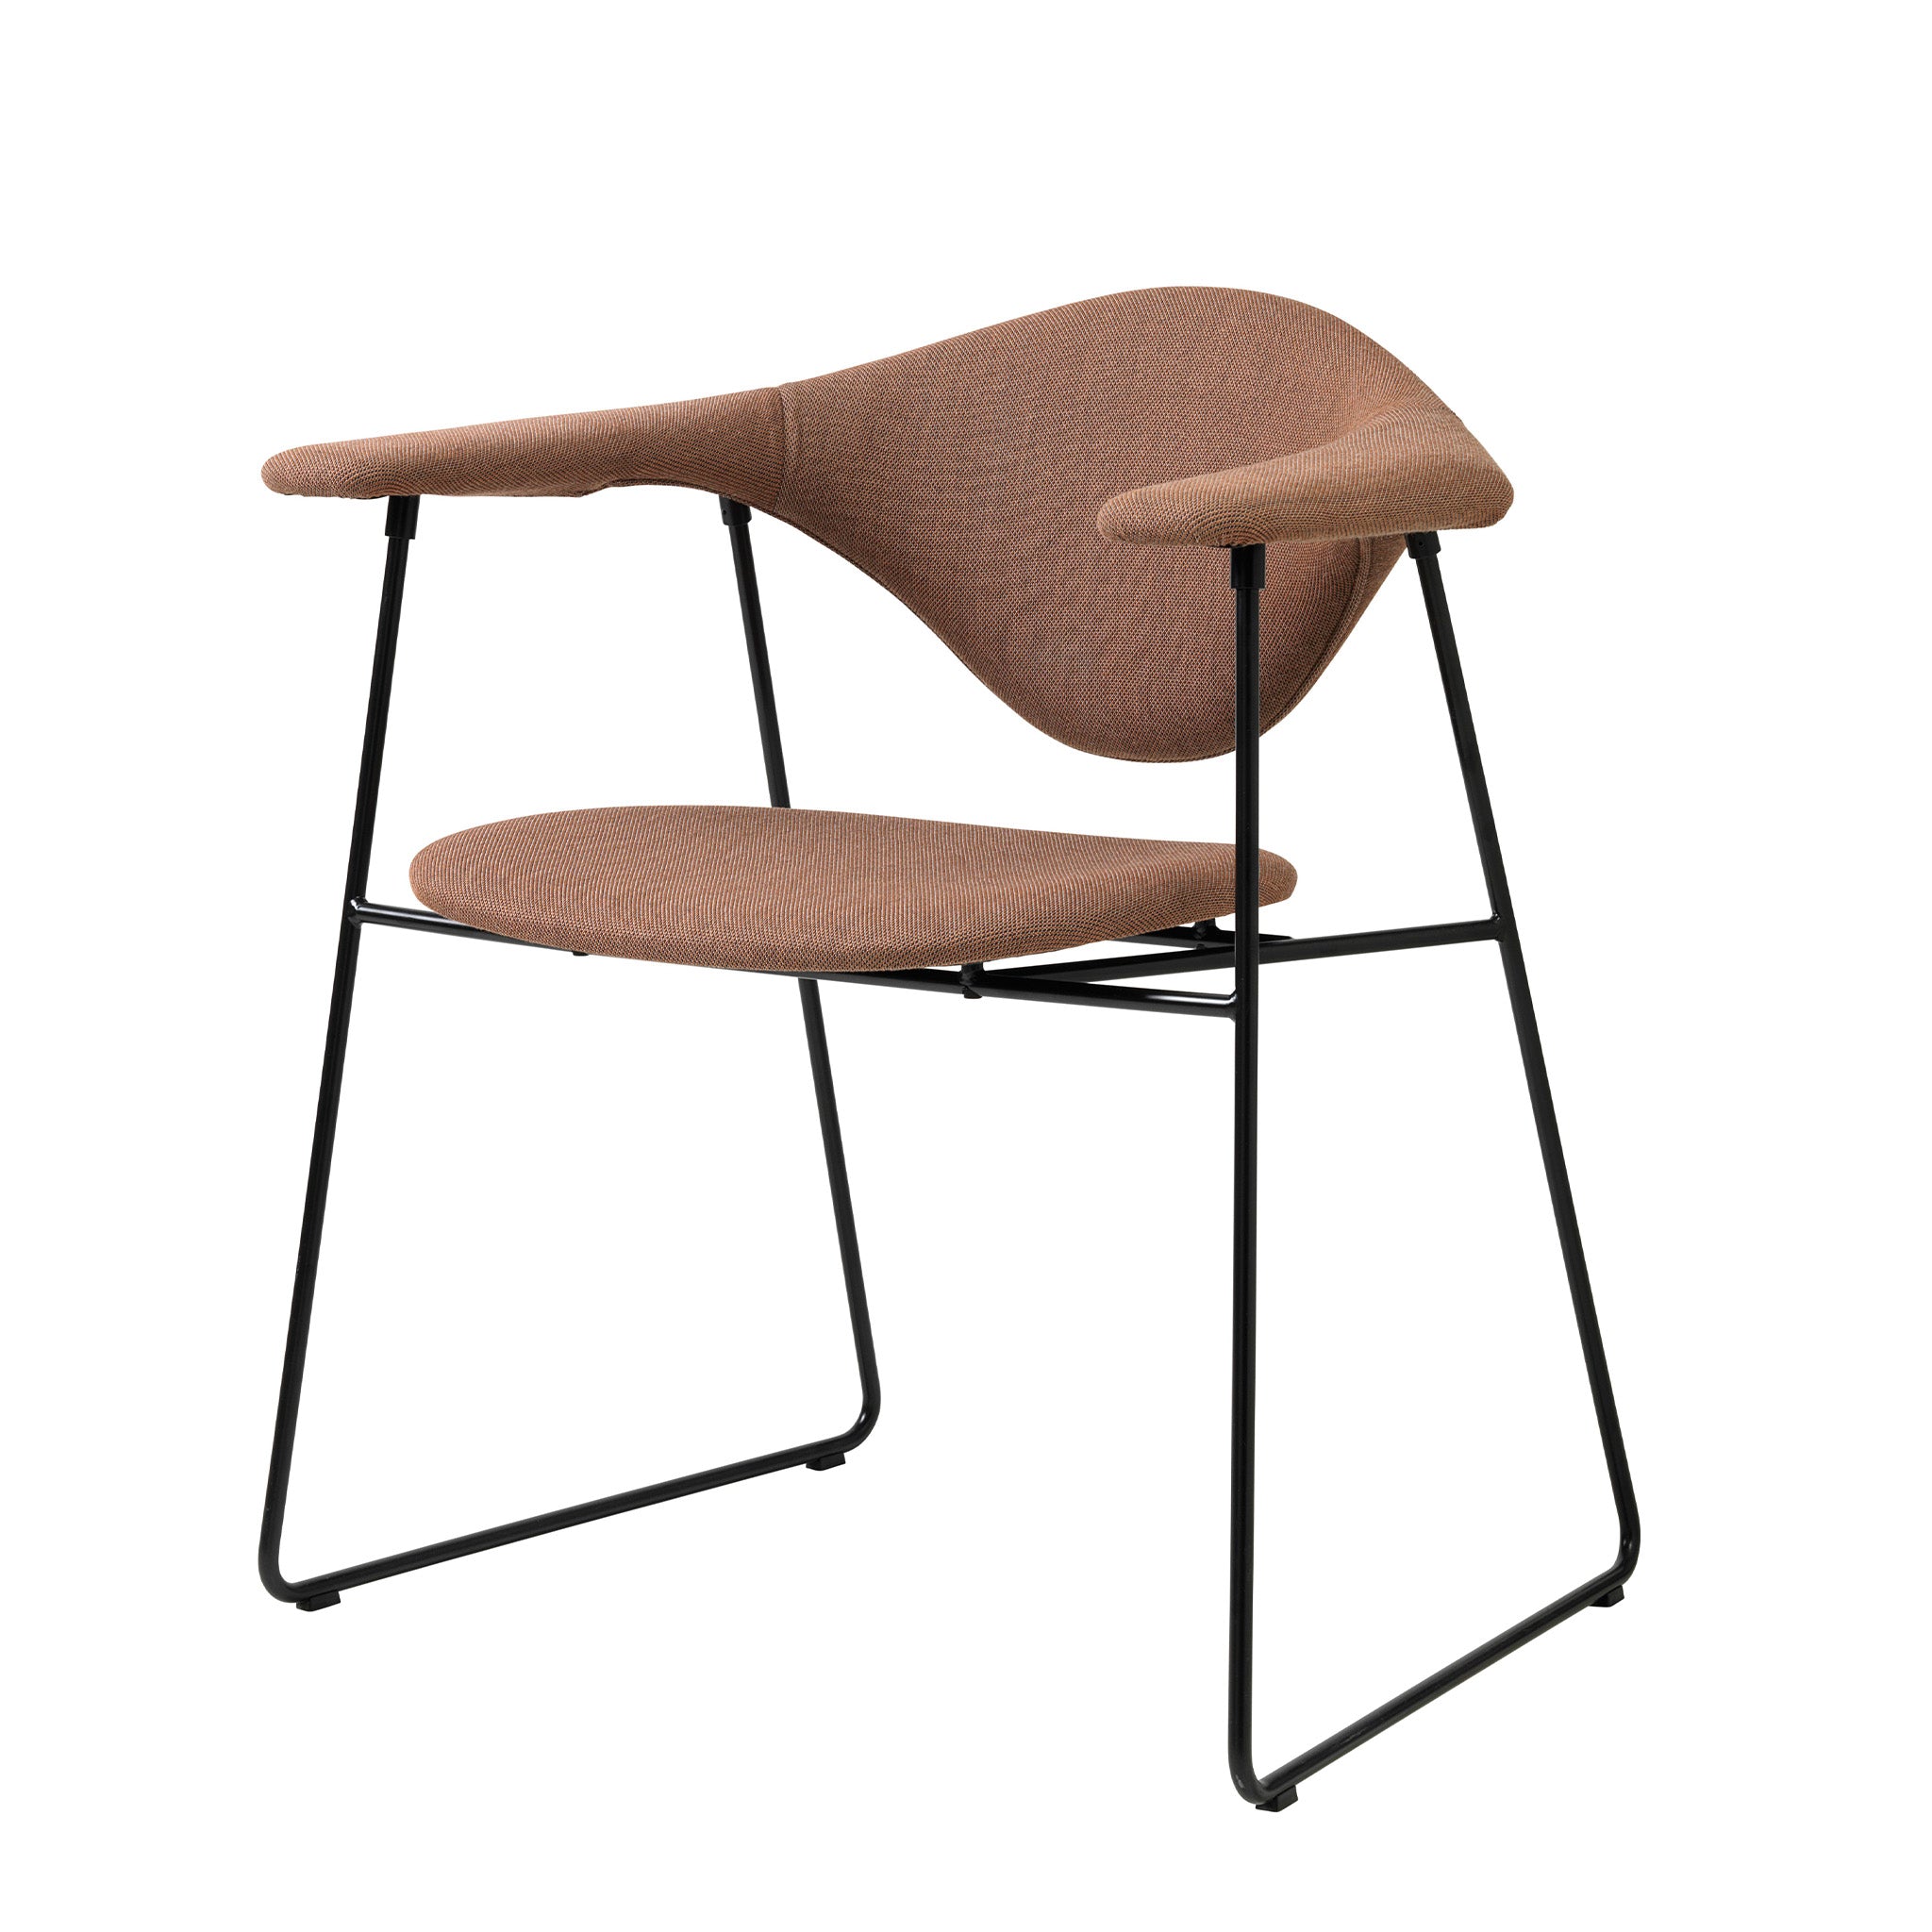 Masculo Chair Fully Upholstered Sledge Base by Gubi